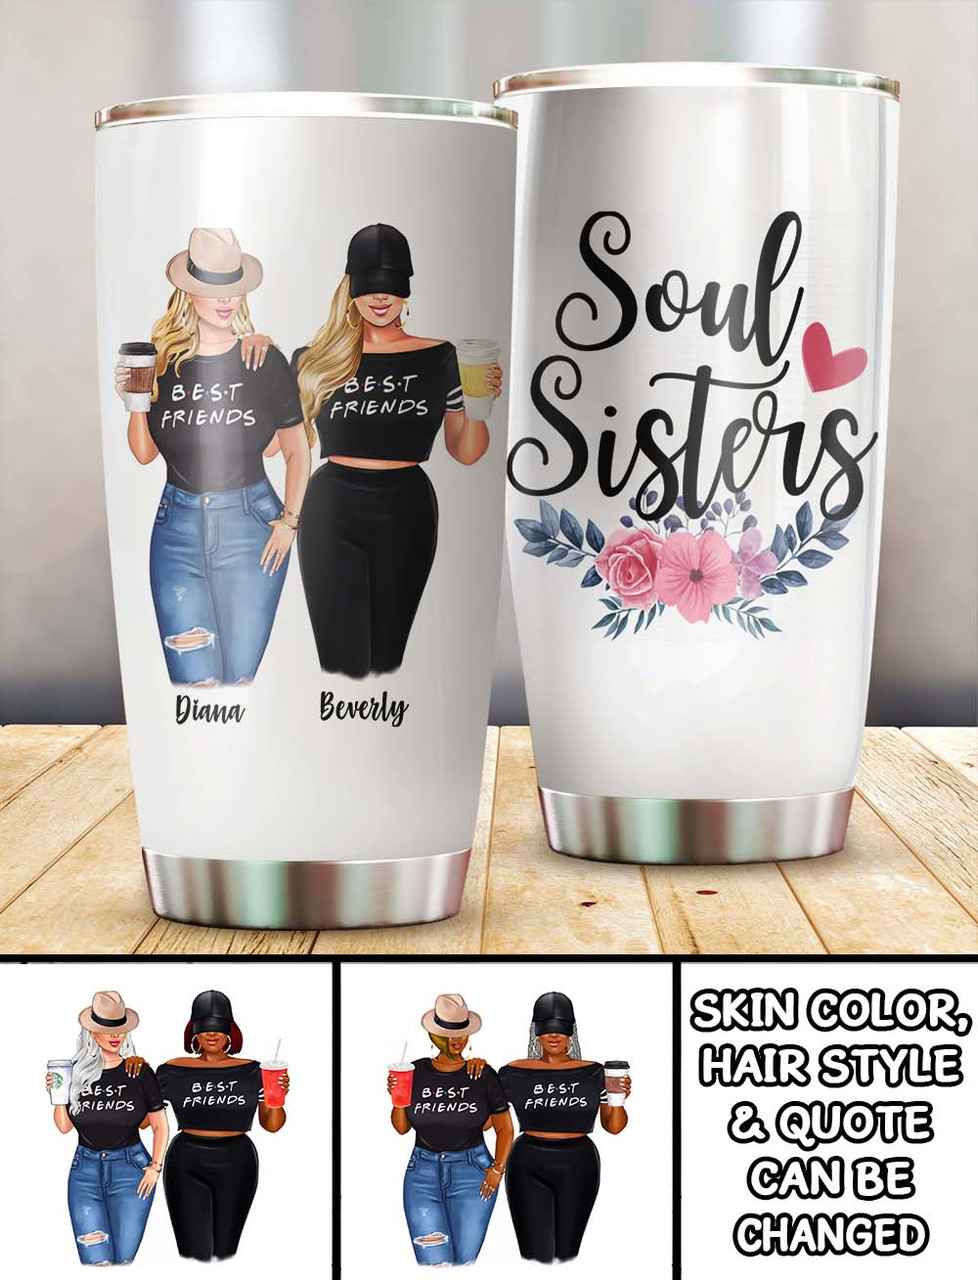 Download Moosfy Personalized Tumbler Best Curvy Friends Sisters Tumbler Best Friend Tumbler Cups Friends Tumbler Cup Sister Tumblers Personalized Best Friend Tumblers